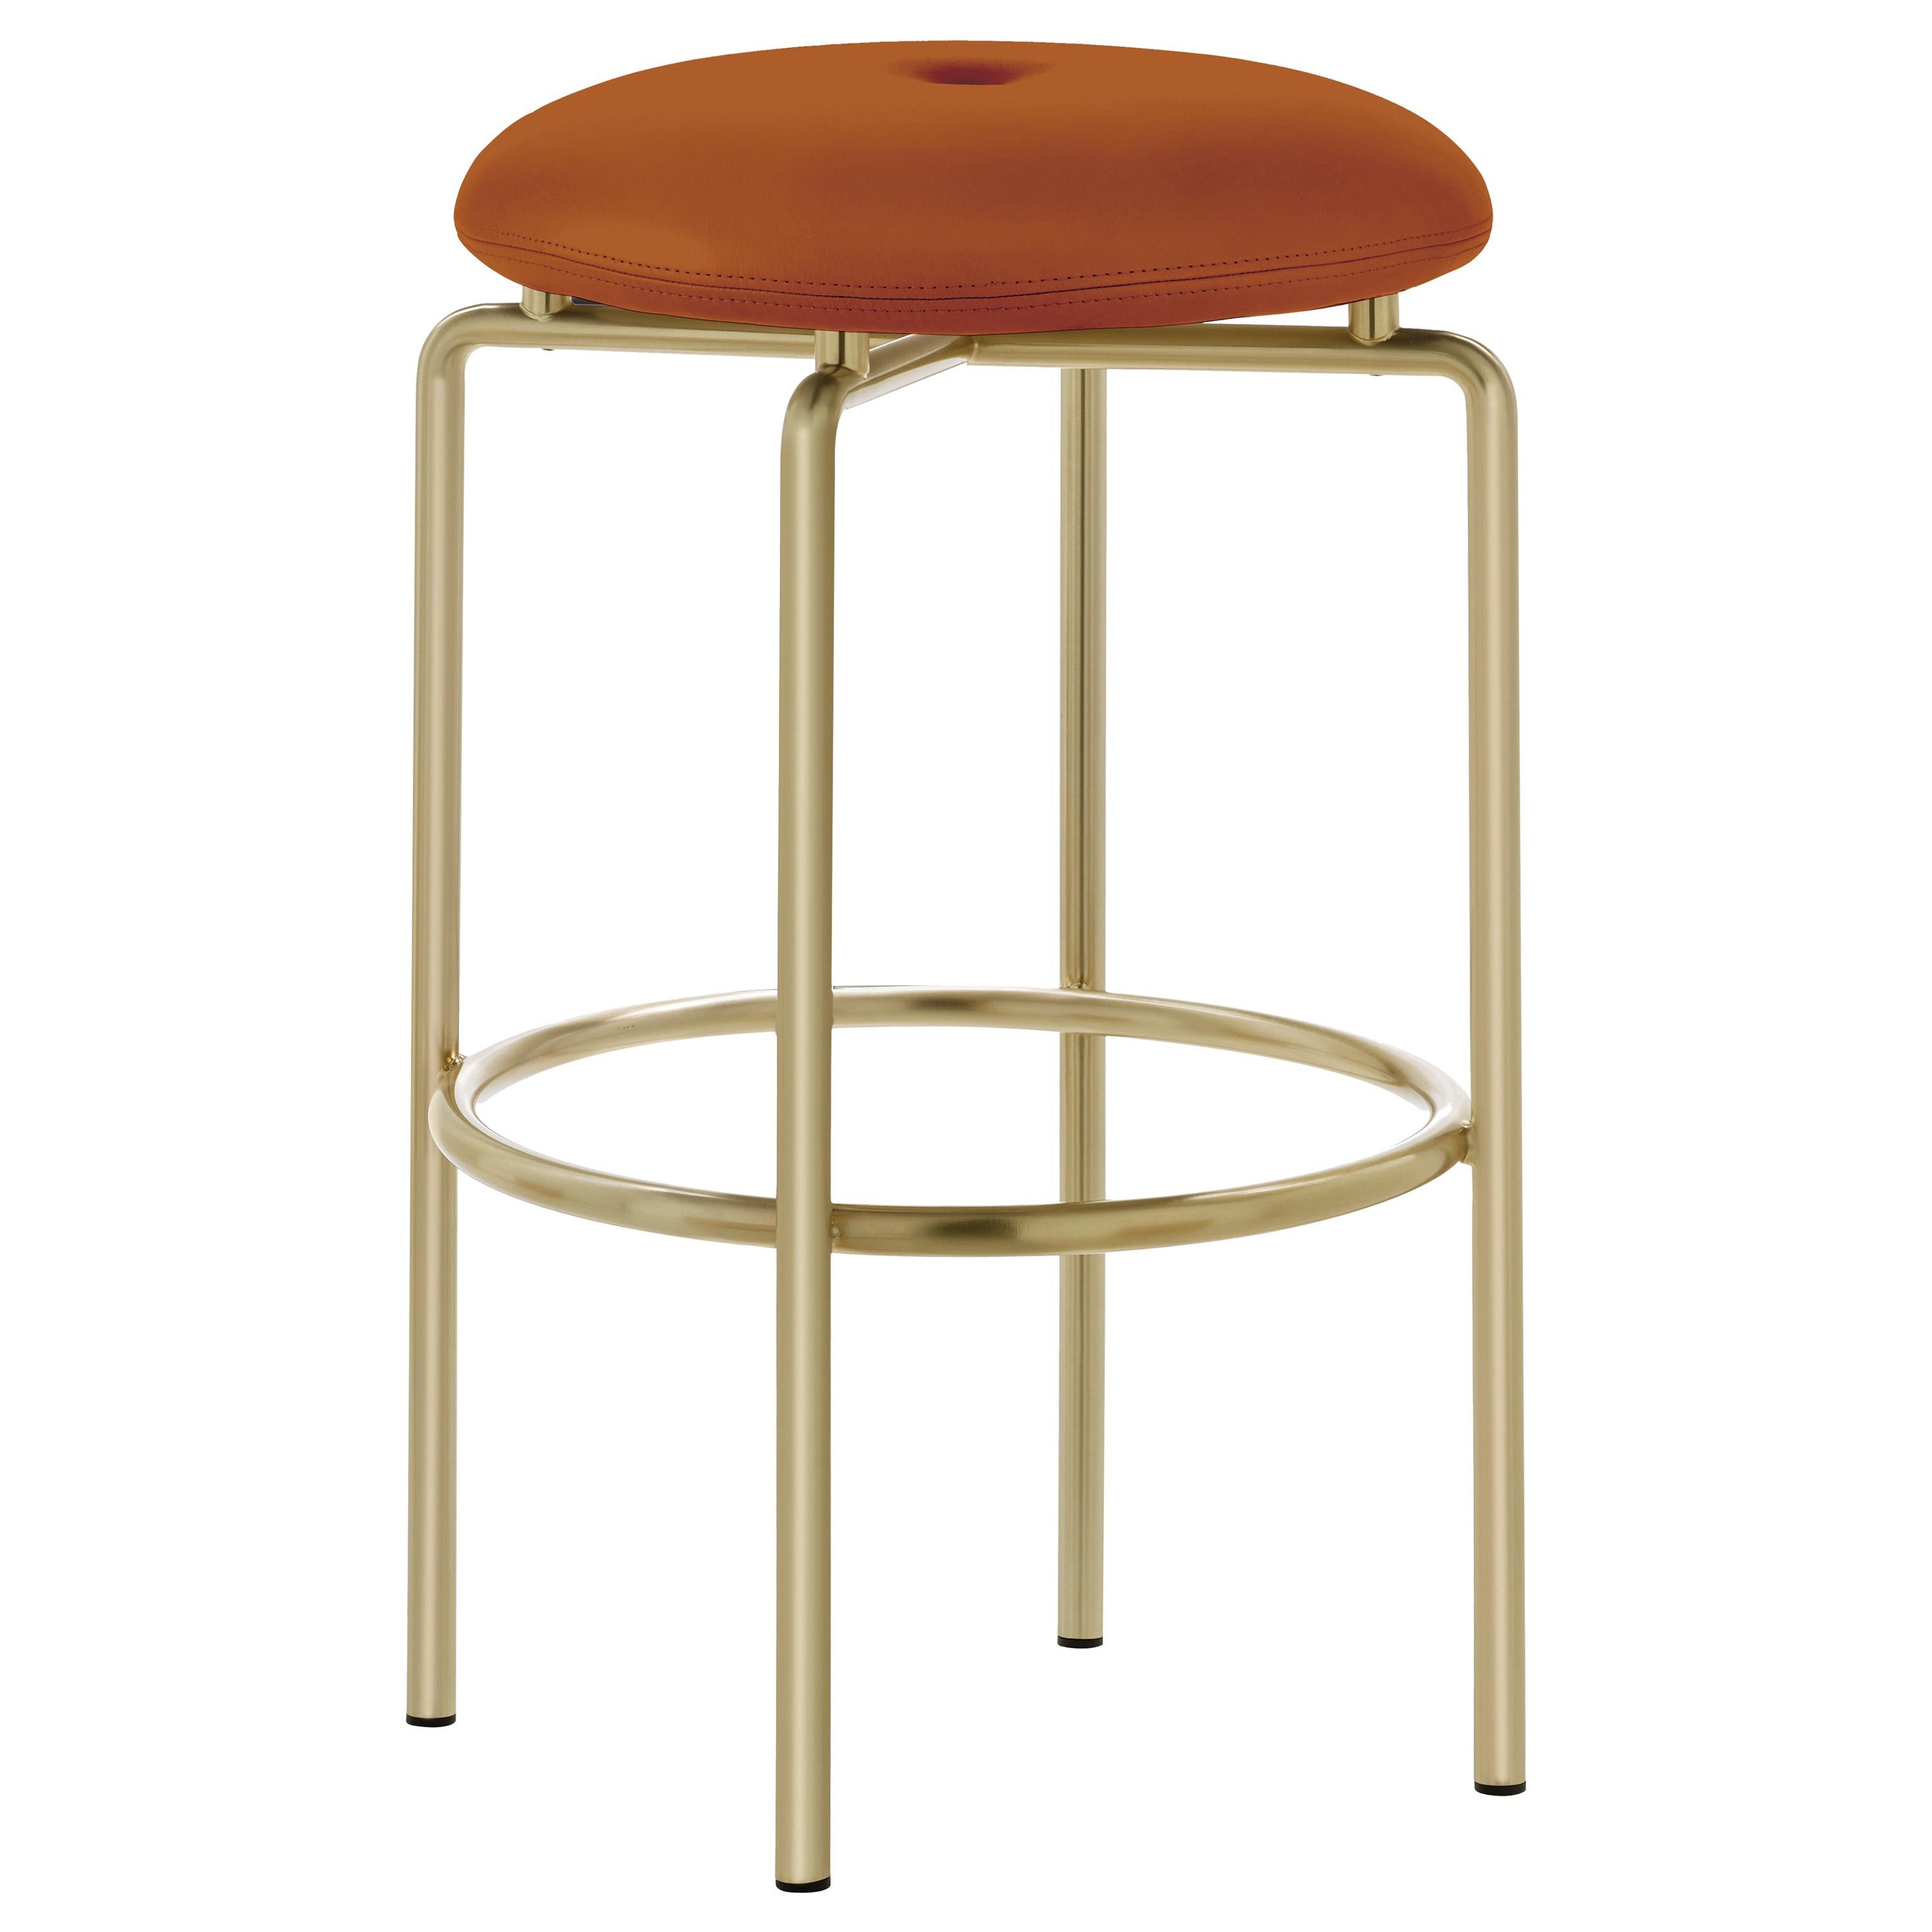 For Sale: Brown (Elegant 43807 British Tan) Circular Counter Stool in Satin Brass and Leather Designed by Craig Bassam